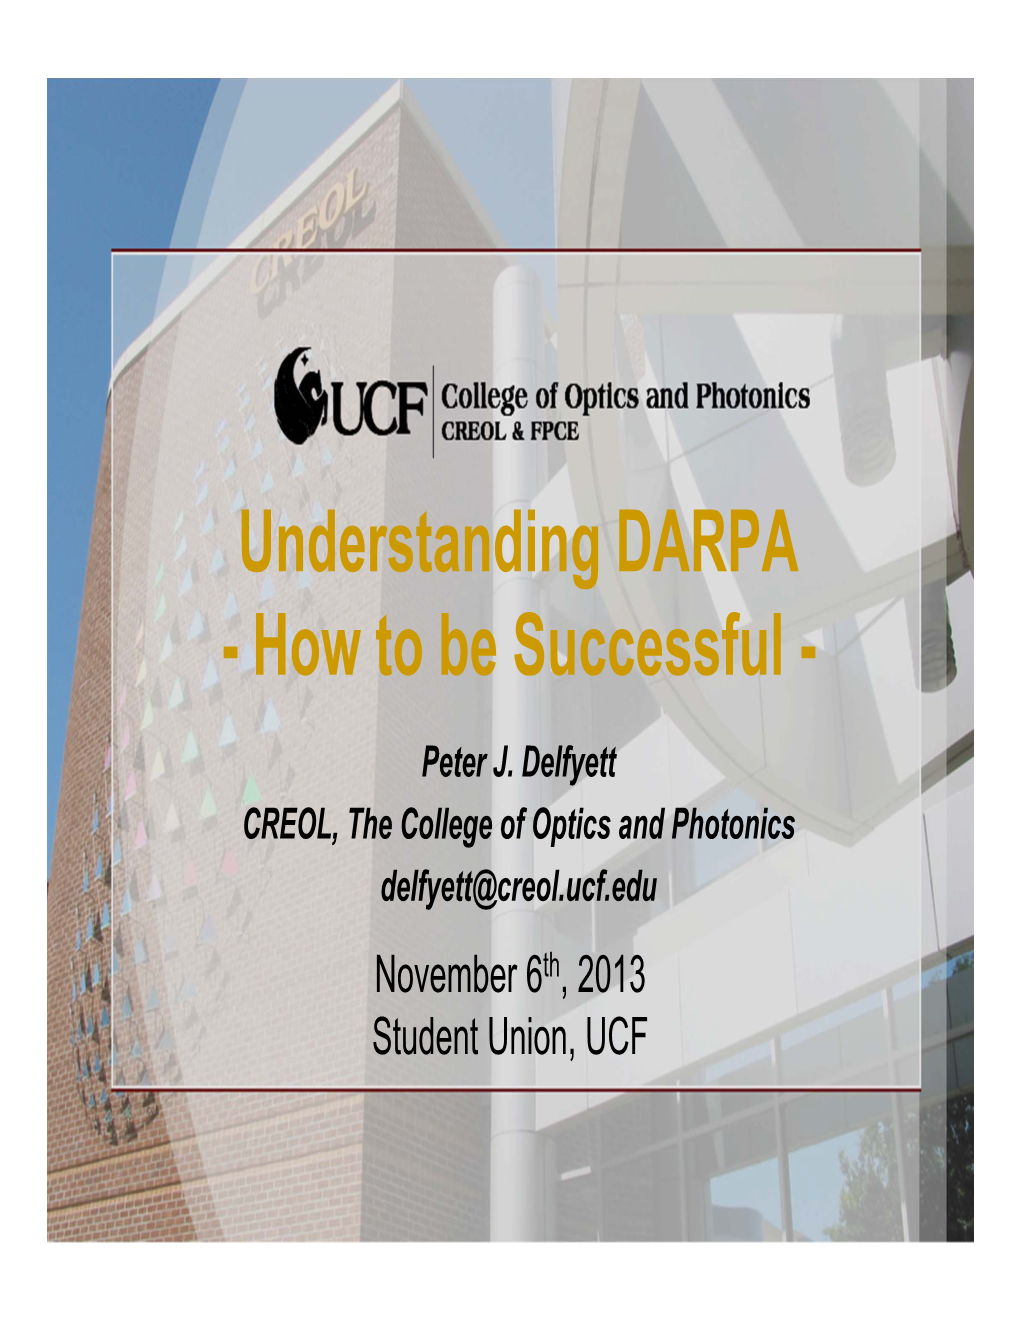 Understanding DARPA - How to Be Successful